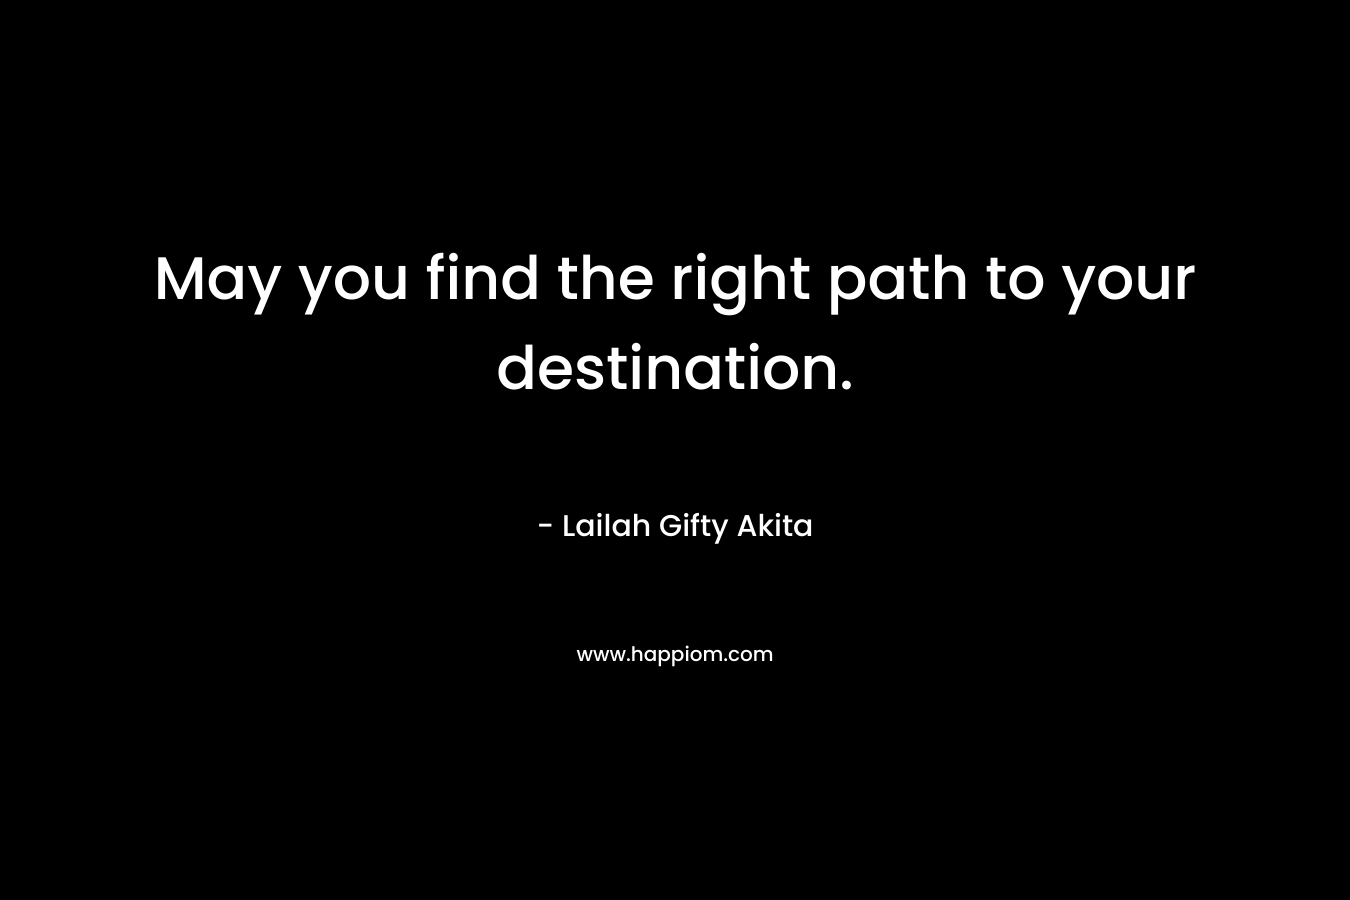 May you find the right path to your destination.